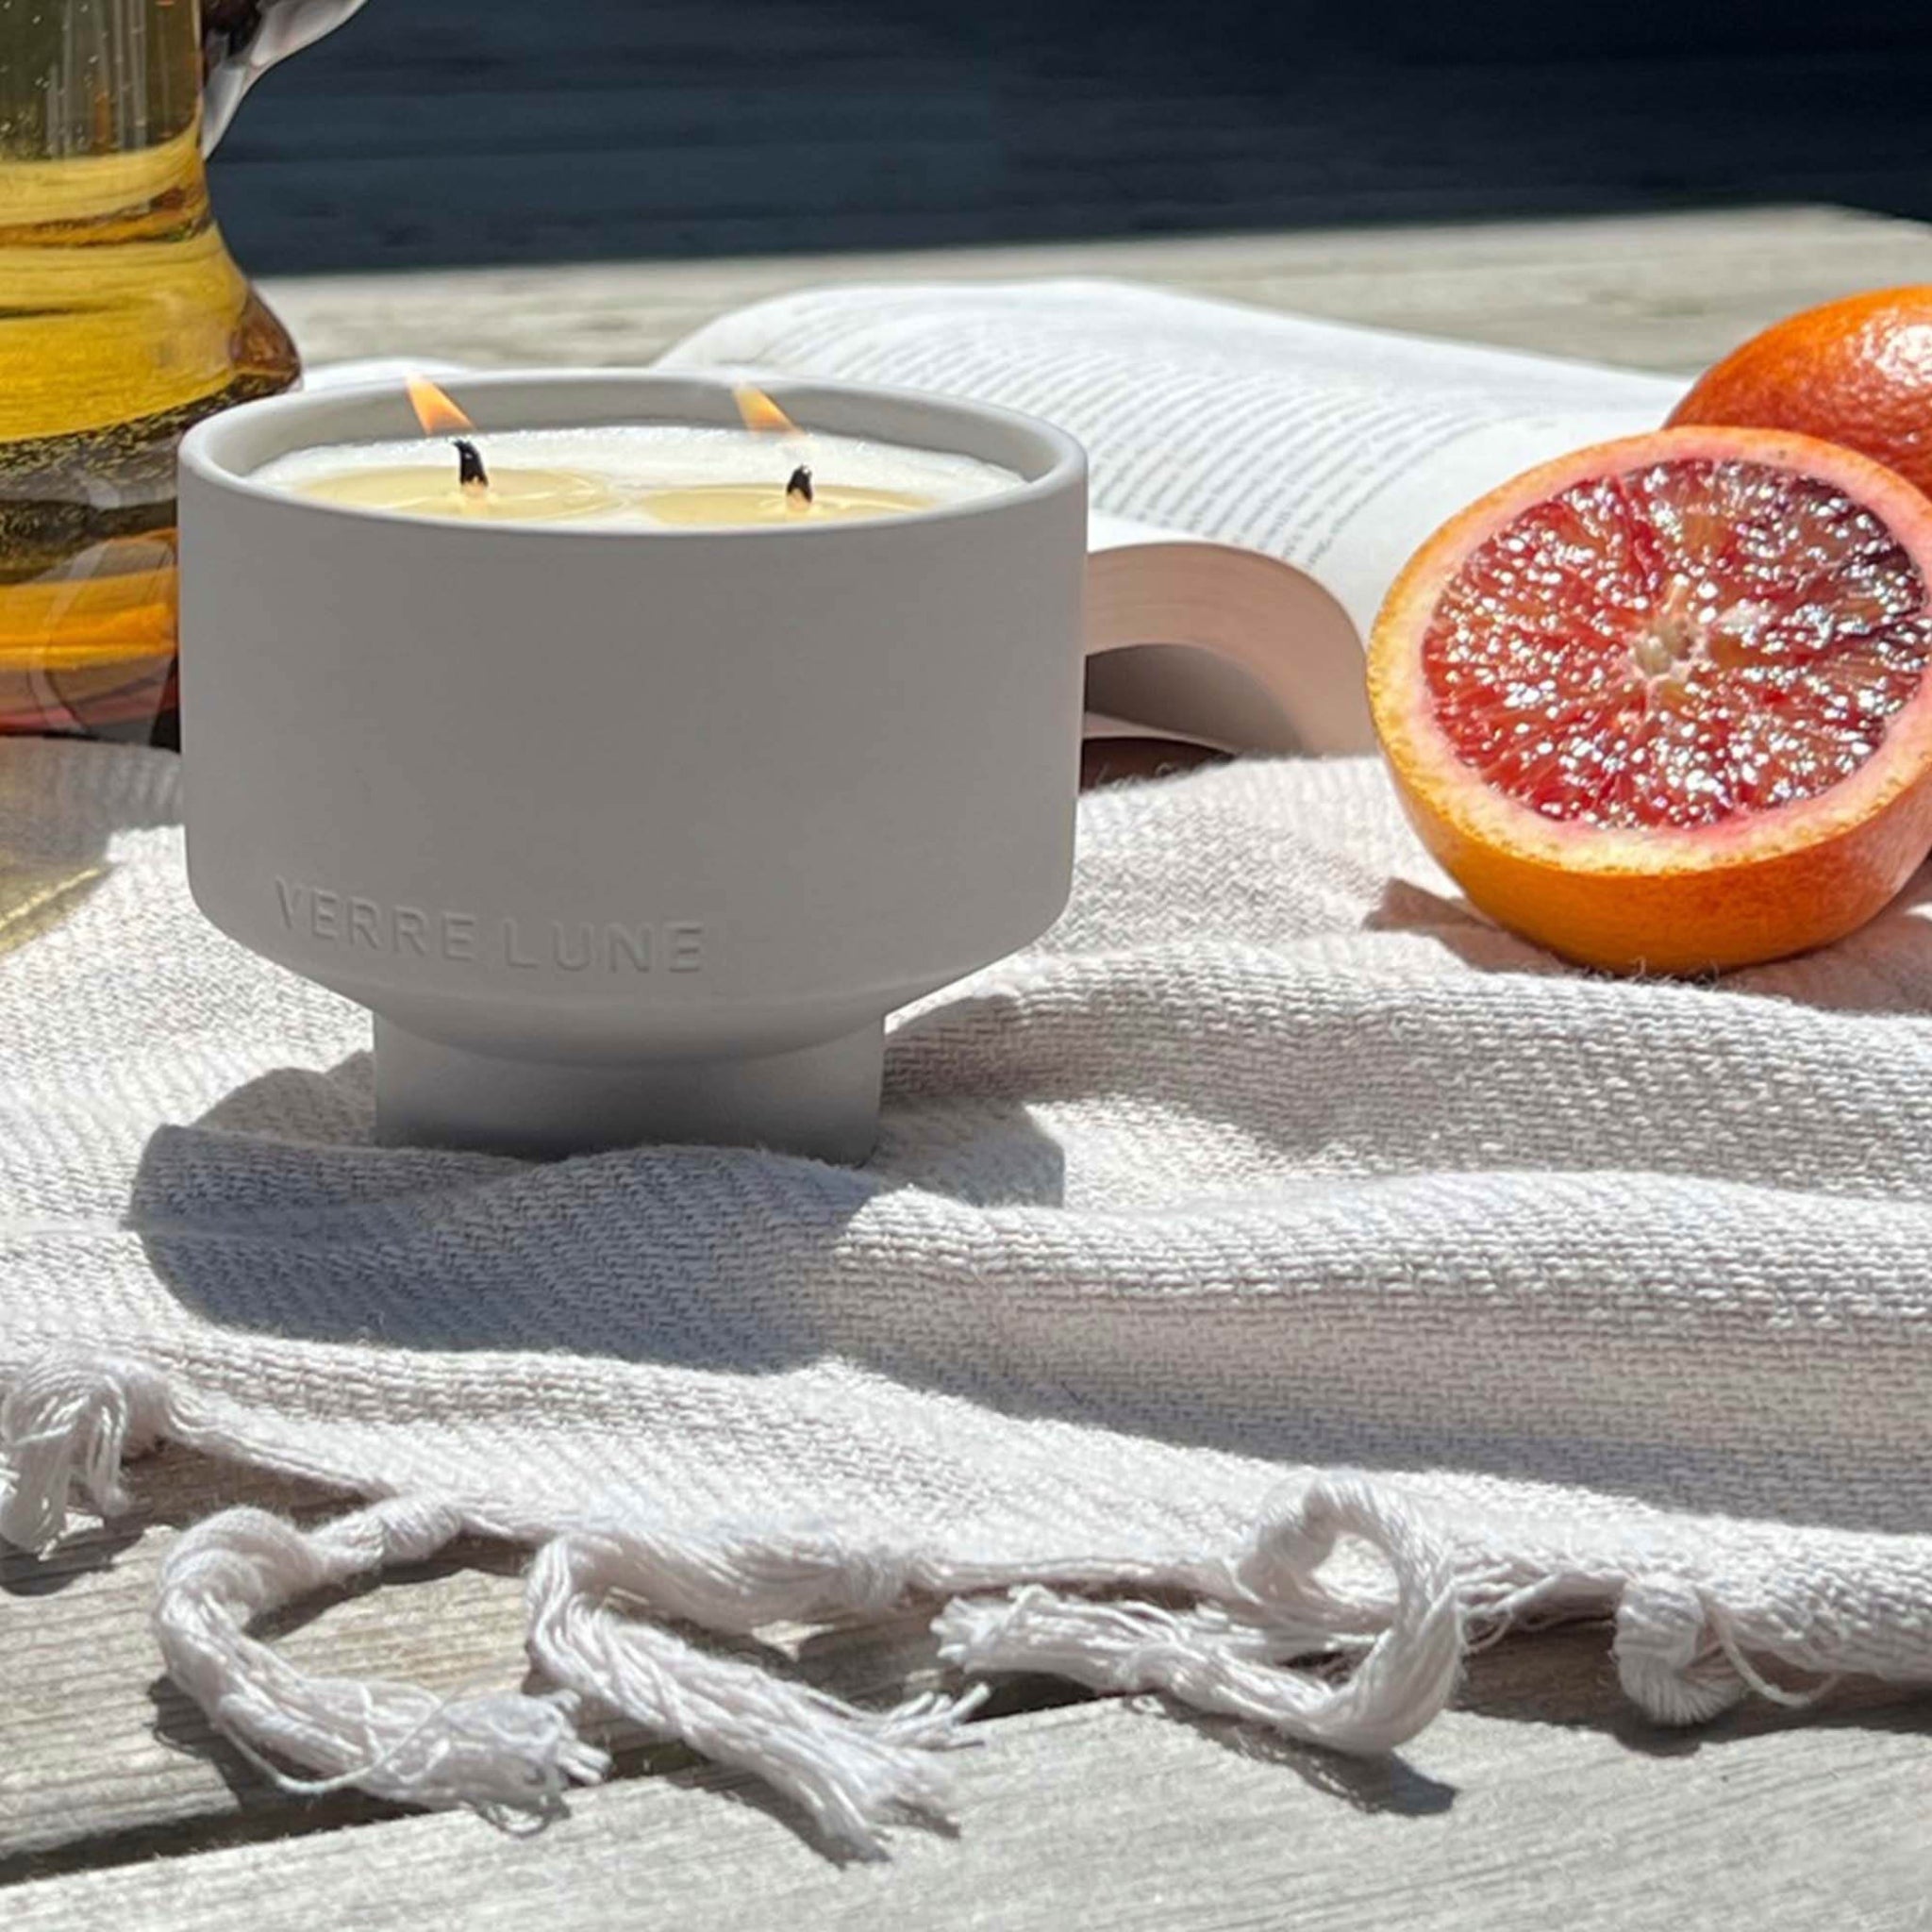 The grove candle in a relaxing environment. grapefruits, lifestyle picture.